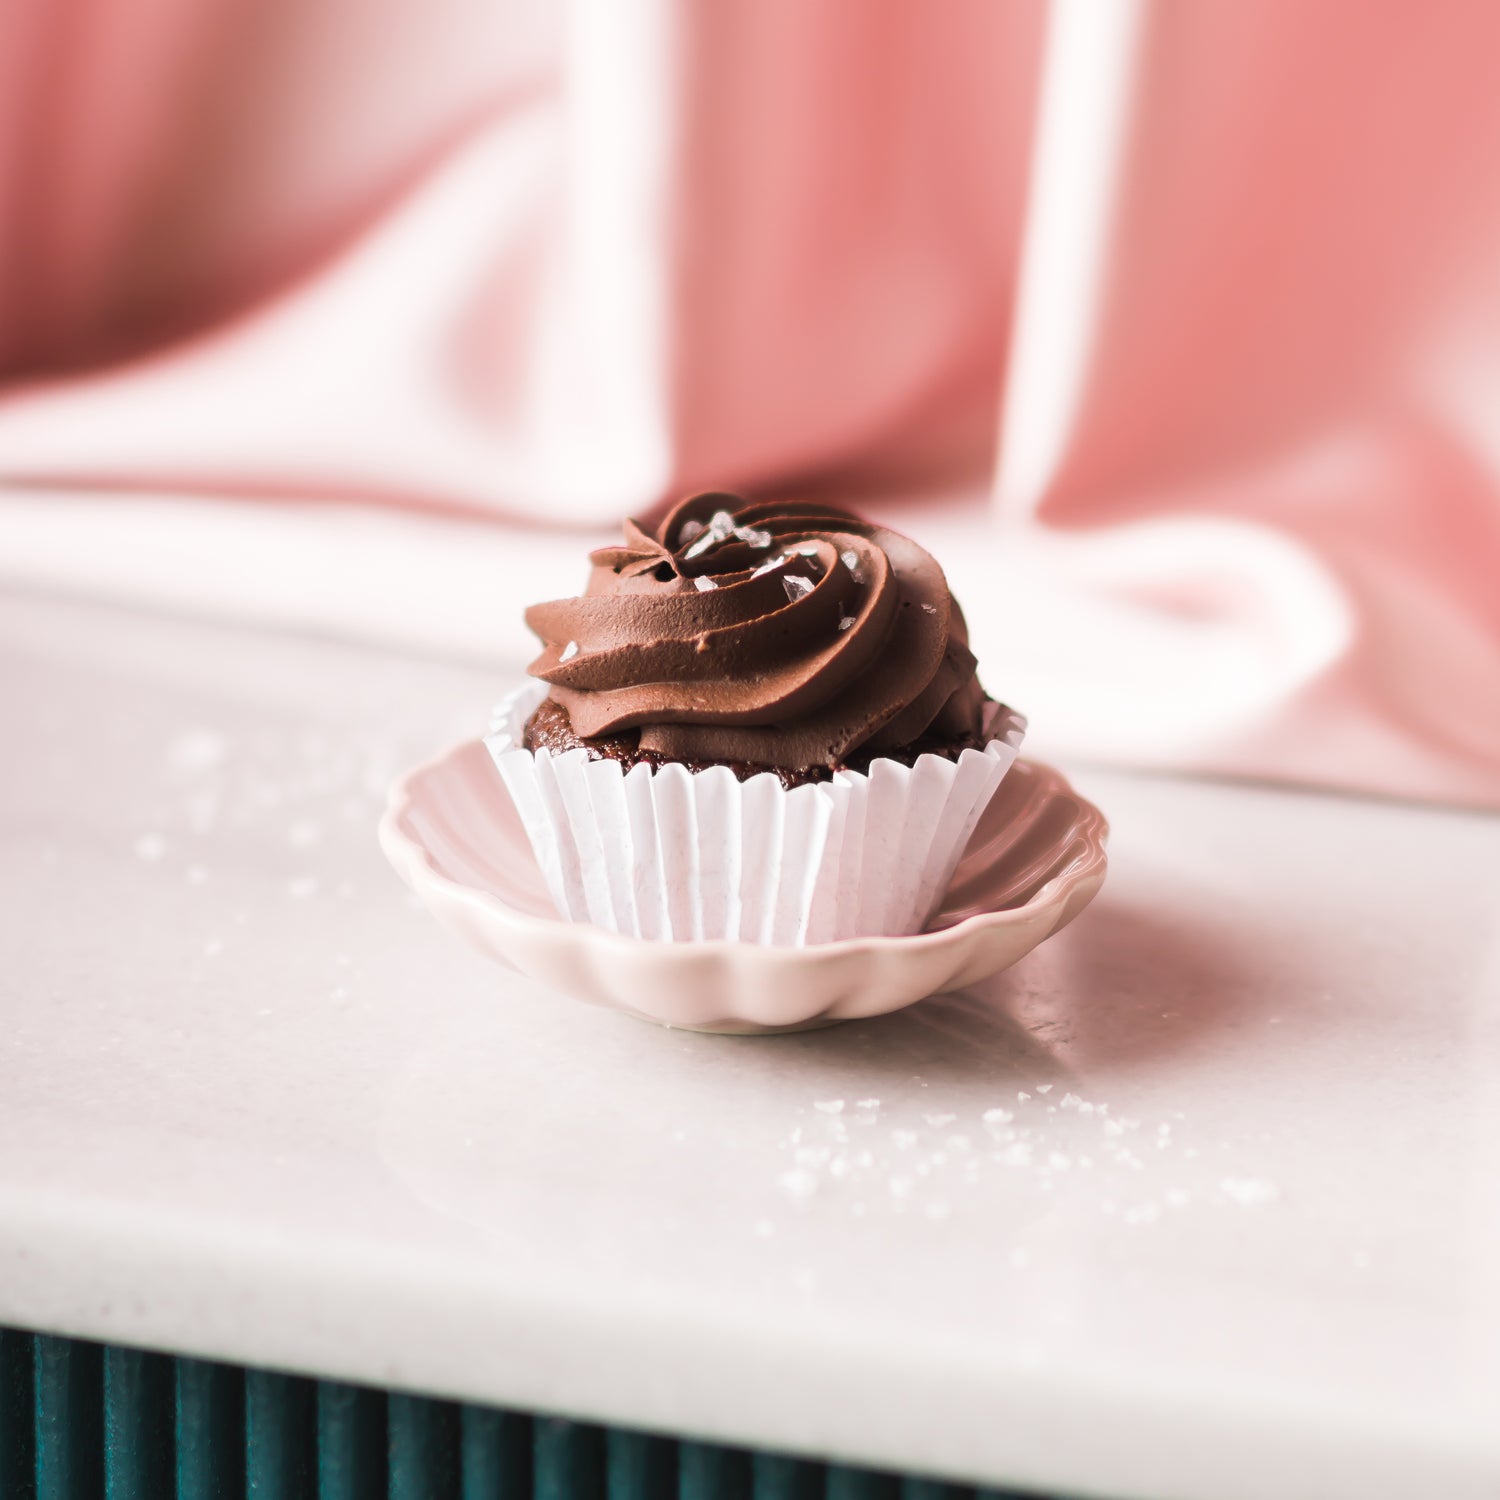 Enjoy a guilt-free indulgence with a rich and moist vegan chocolate cupcake, topped with smooth vegan chocolate frosting. Perfectly paired with a crisp and refreshing Brut Cava, the subtle sweetness of the cupcake complements the dry and effervescent bubbles of the wine. Celebrate any occasion with this delicious and cruelty-free combination.